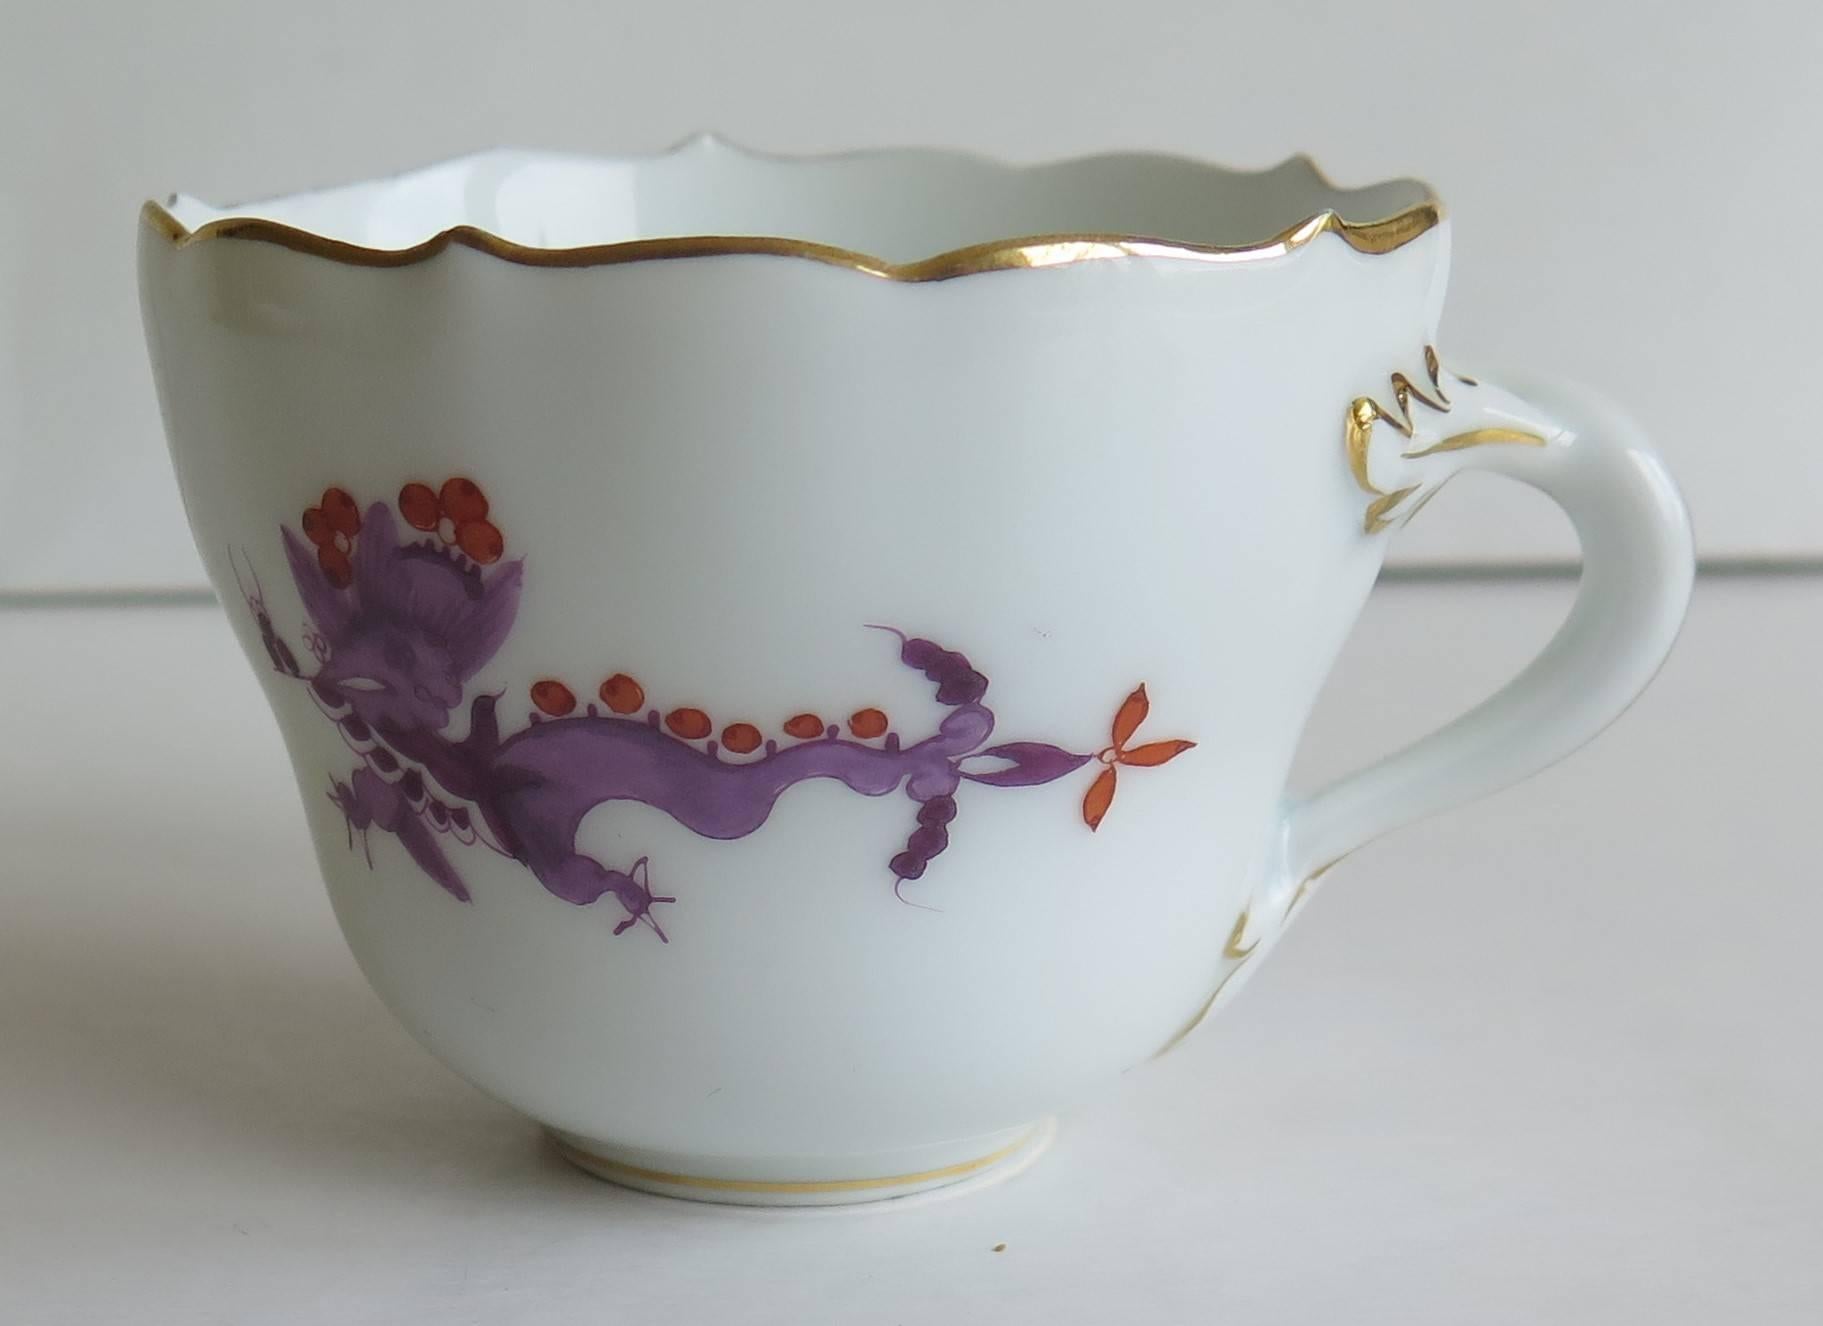 Glazed Meissen Porcelain Demitasse Cup and Saucer Chinese Dragon Pattern, circa 1928